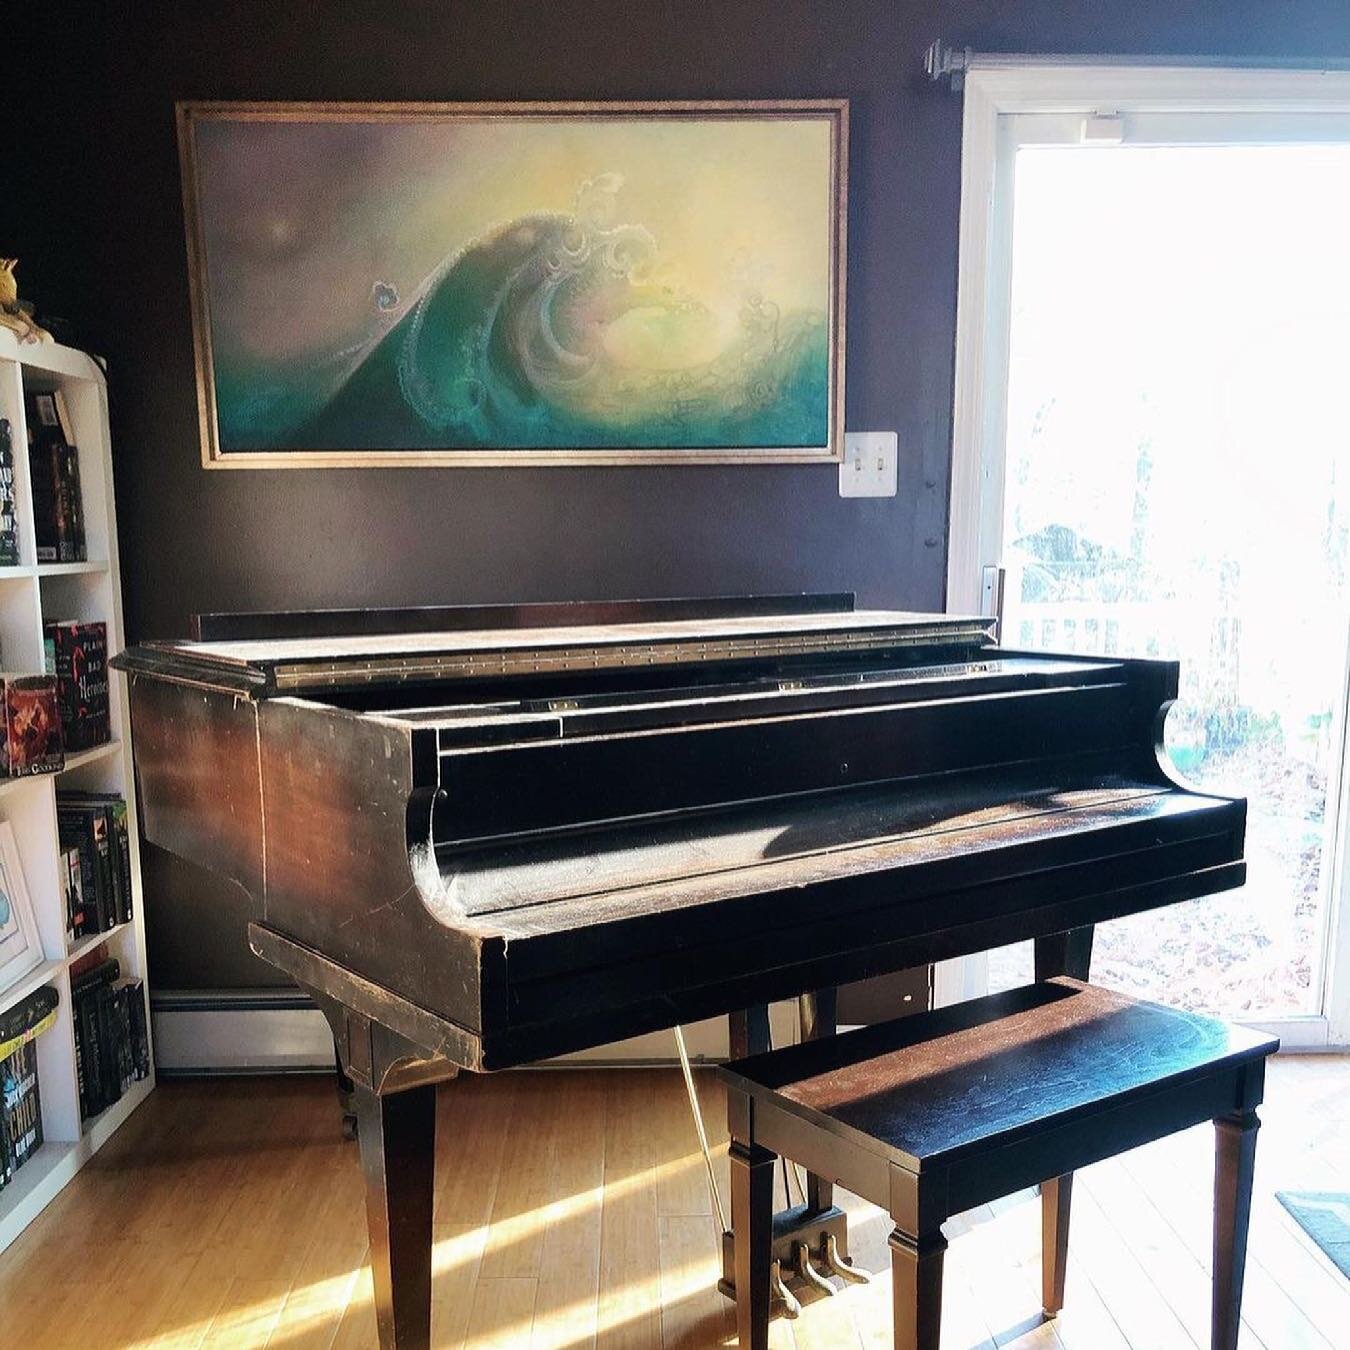 Happy Friday! Today&rsquo;s theme is &ldquo;in use&rdquo;...
Having an art show in a gallery is real nice but I LOVE seeing my work in collectors homes...even better seeing it in such good company with a beautiful baby grand! Perfect mix of new &amp;